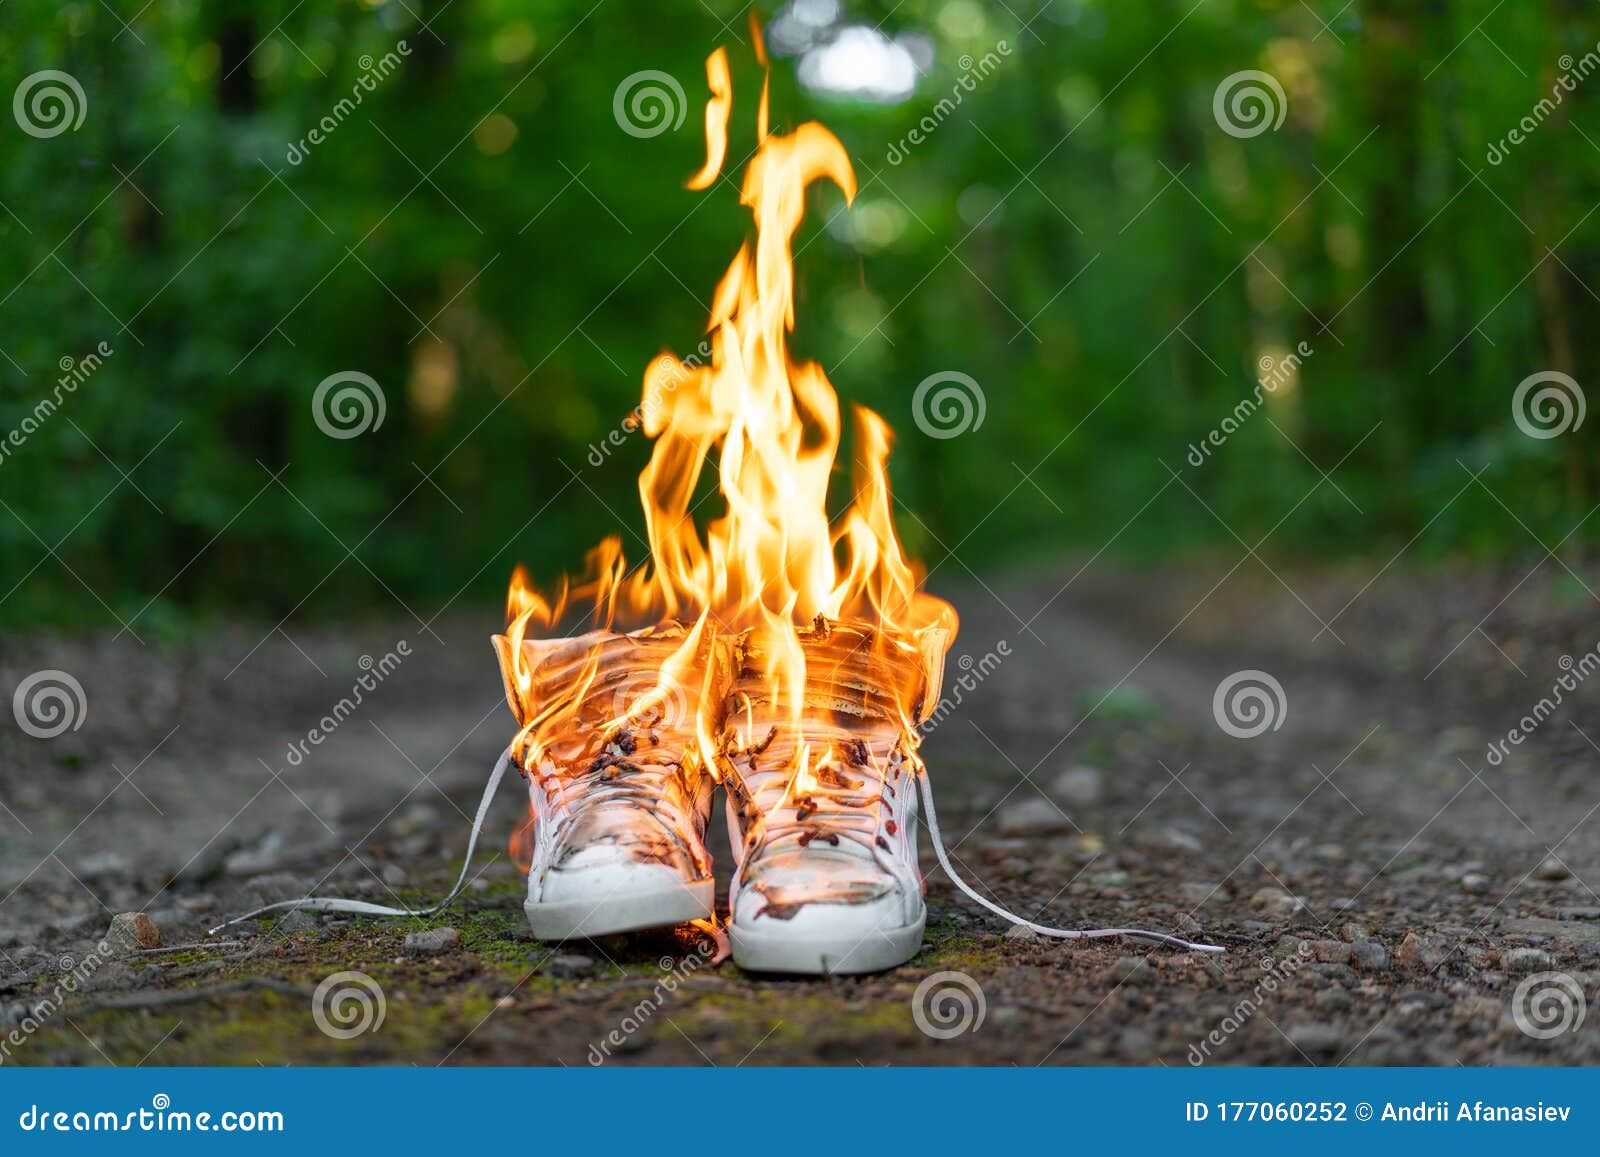 Used White High Sneakers Burning on a Rural Road that Runs in the ...